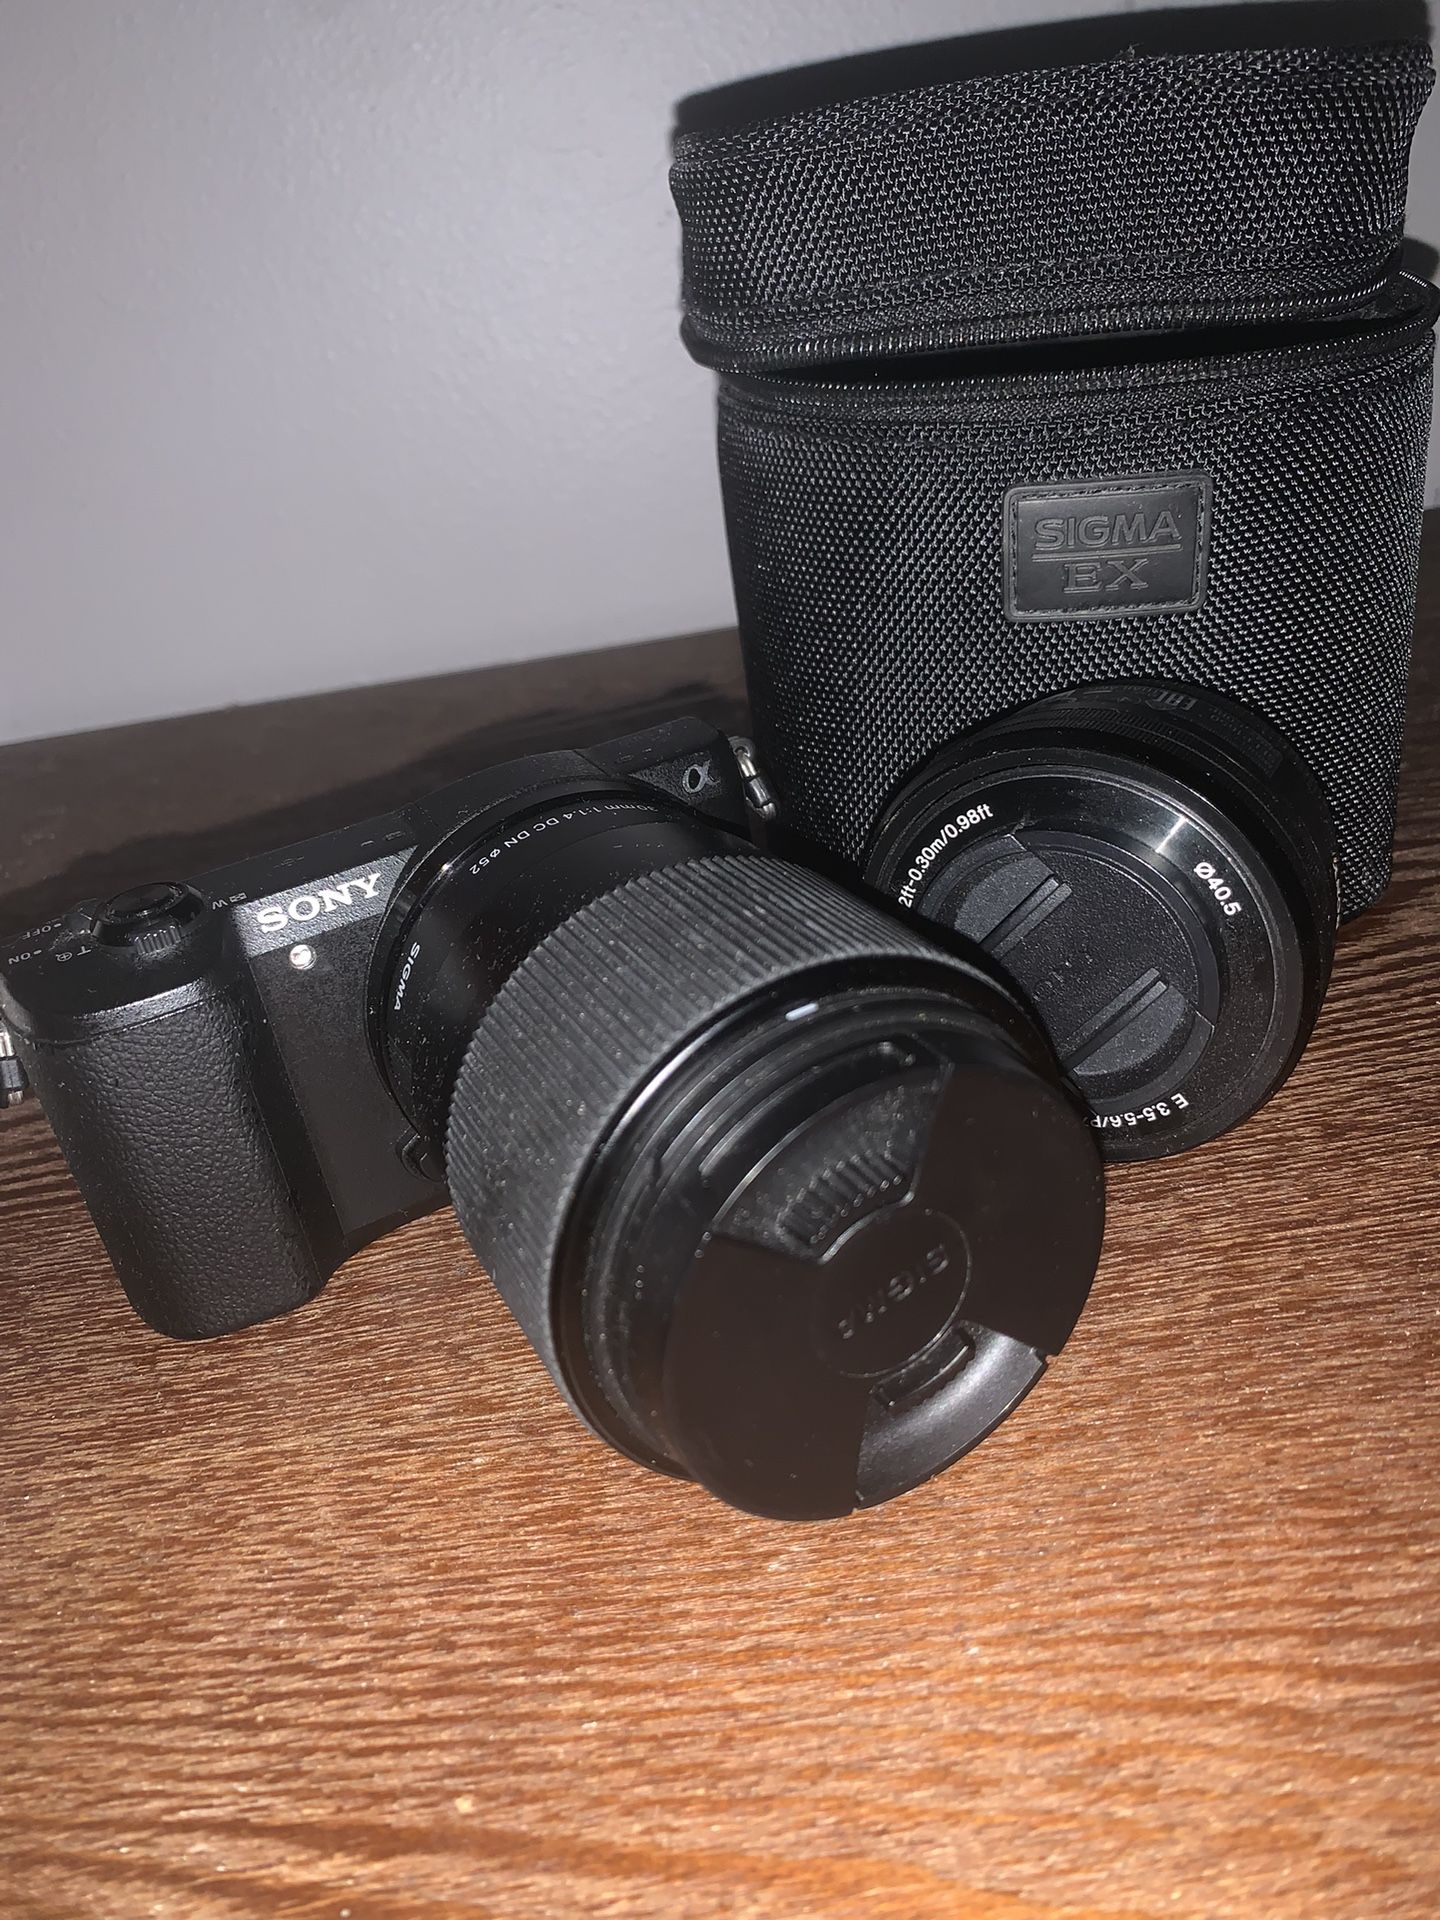 Sony A5100 With Sigma Lens